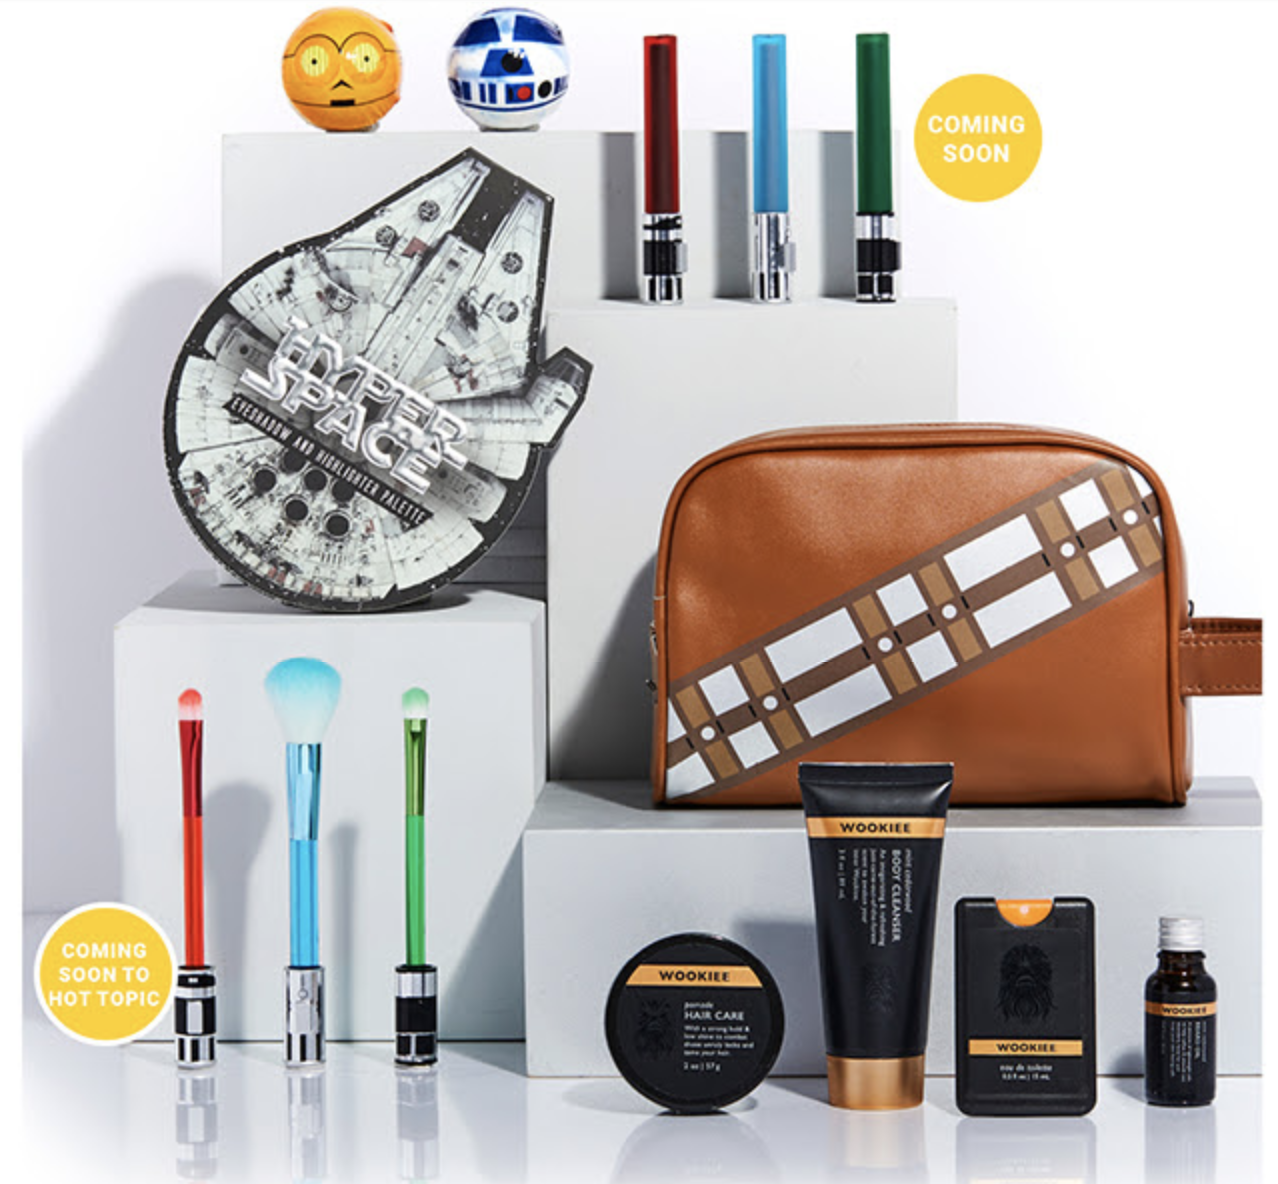 Star Wars Beauty Collection